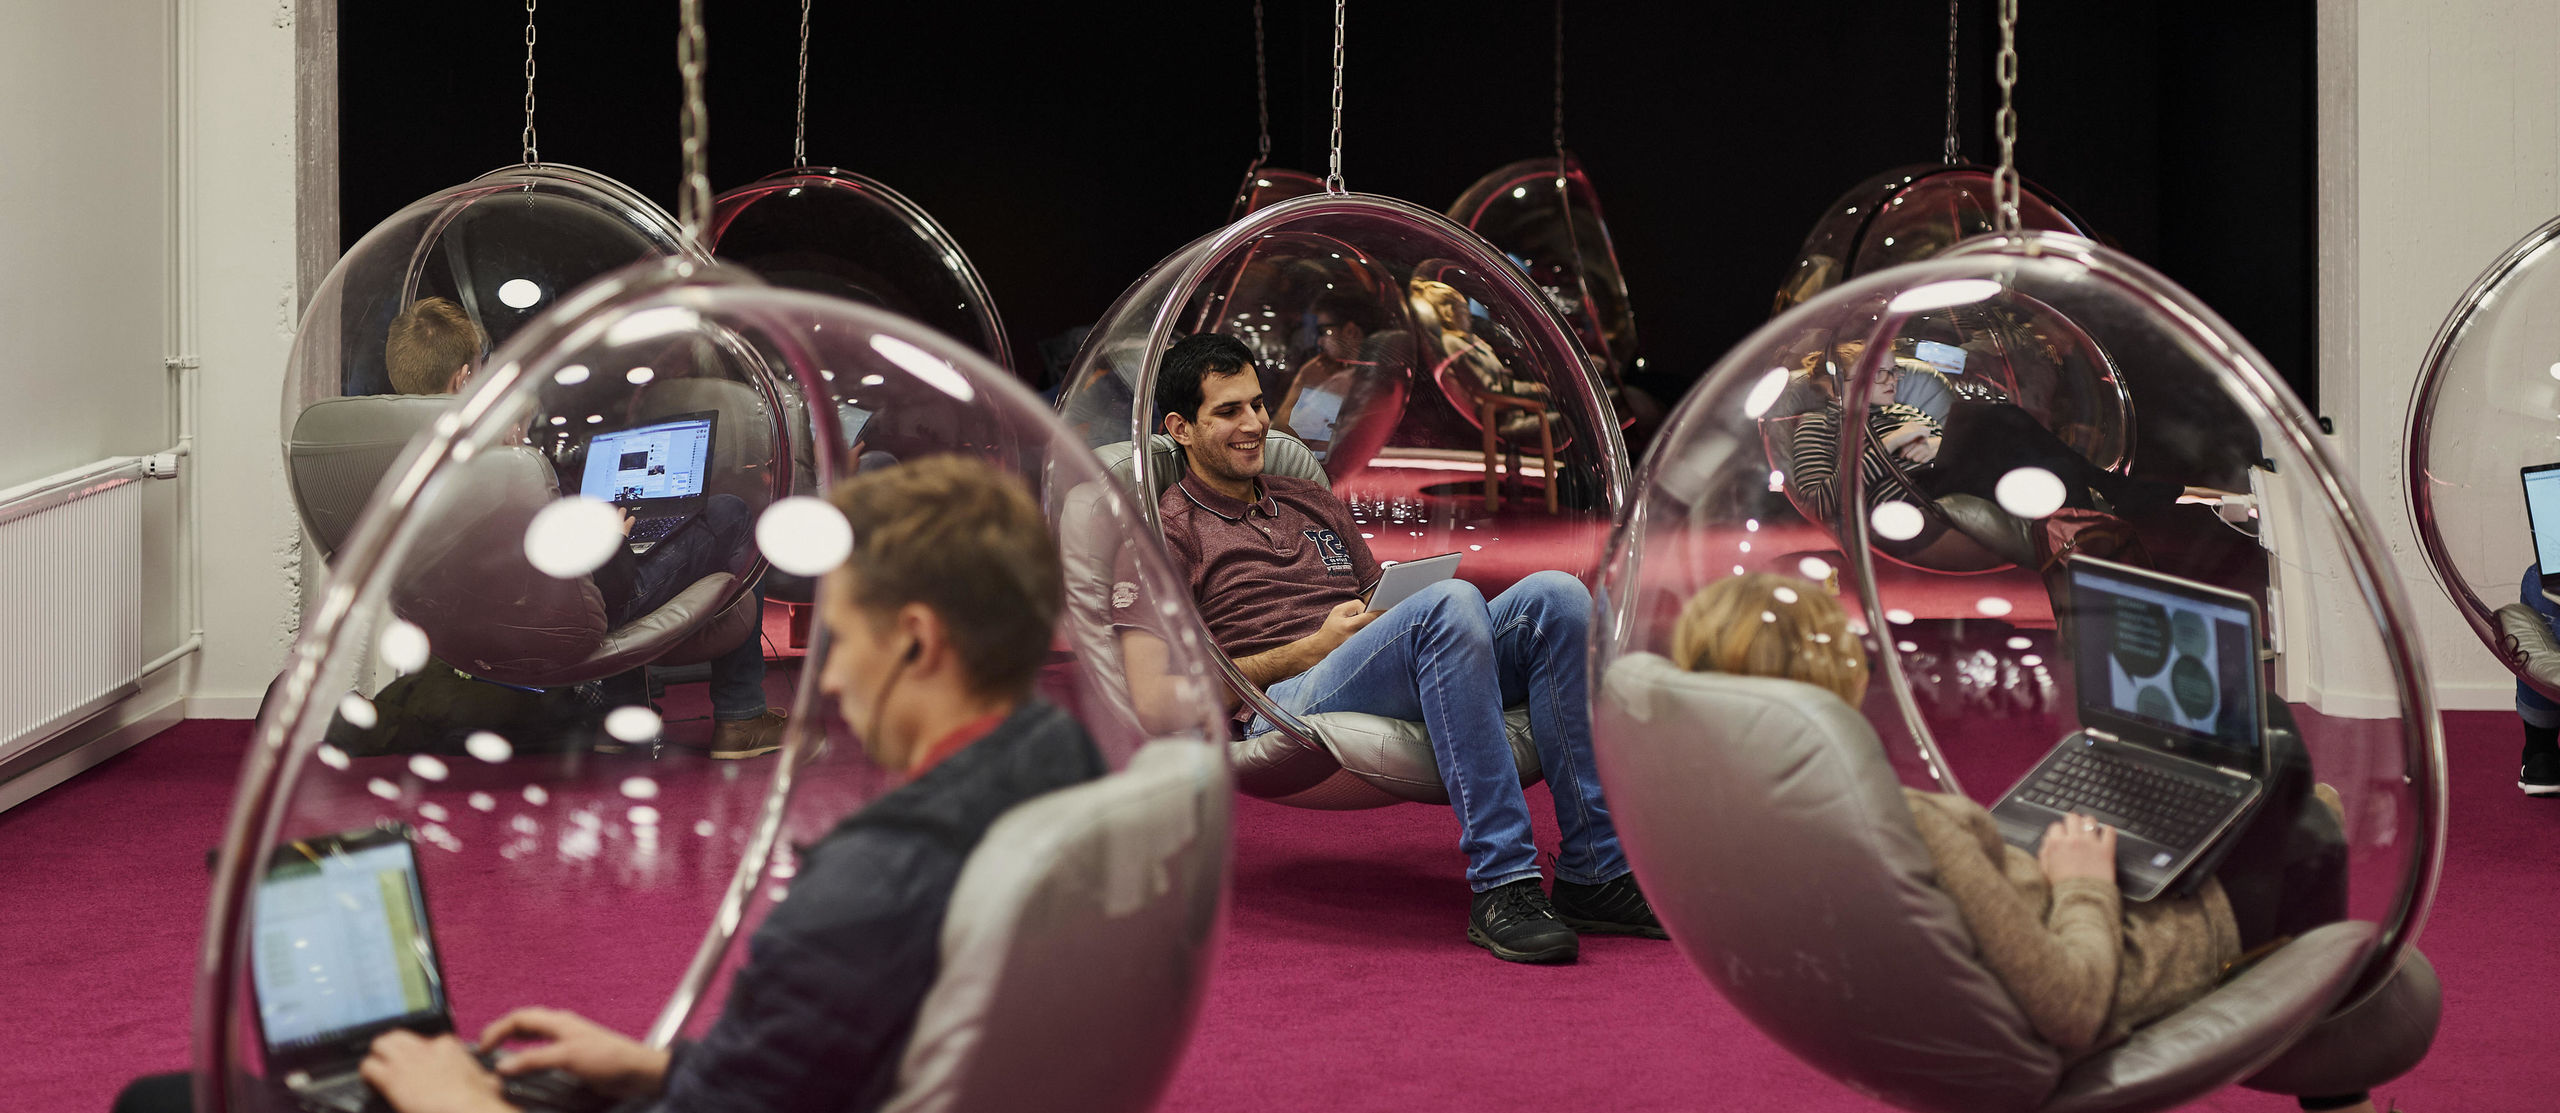 People sitting in hanging transparent chairs in a room with a pink carpet